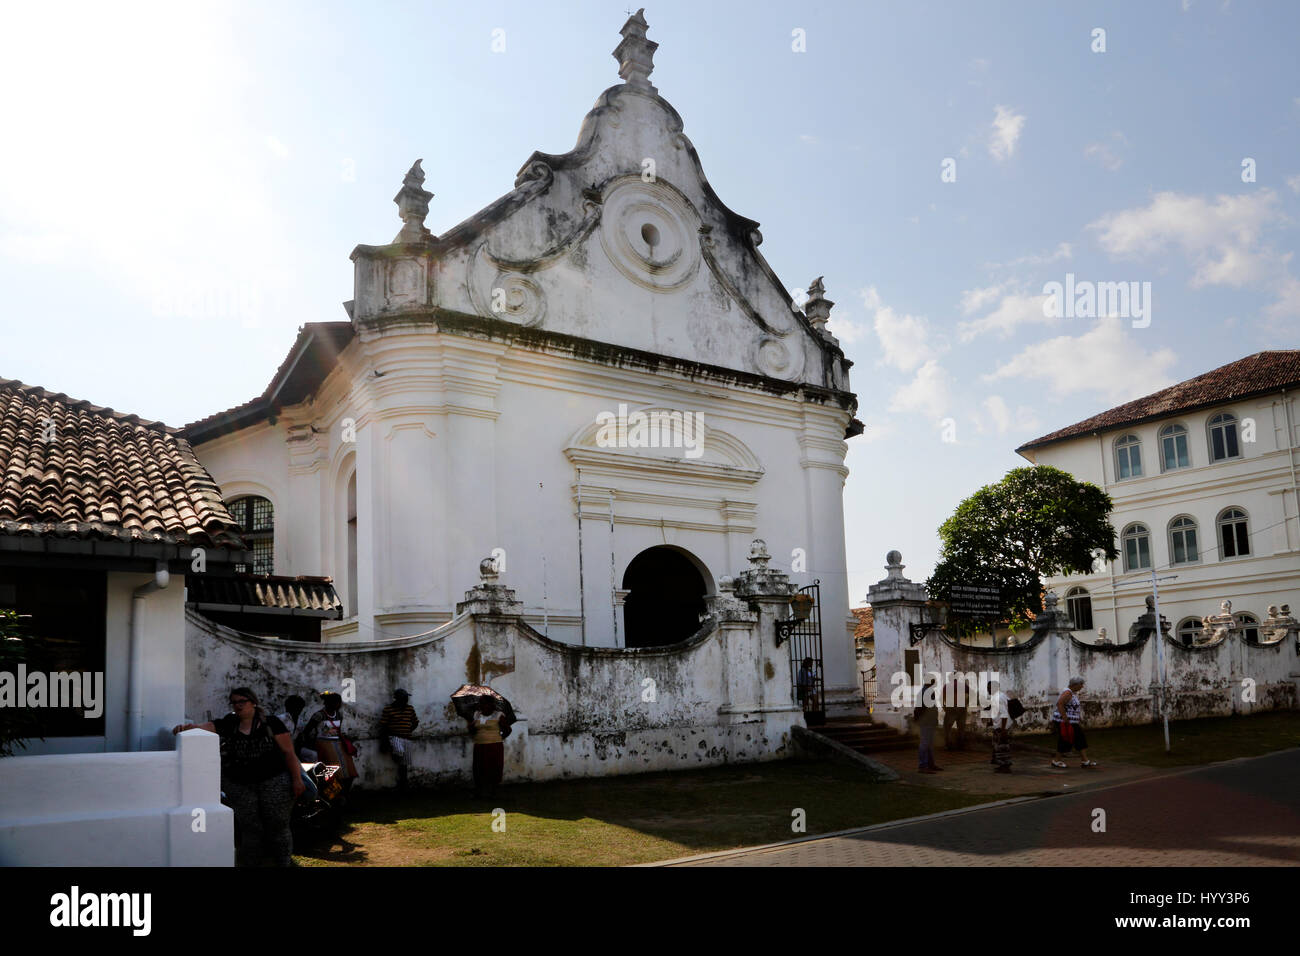 Galle Sri Lanka Galle Fort Dutch Reformed Church built around 1755 Locals and tourists outside Stock Photo